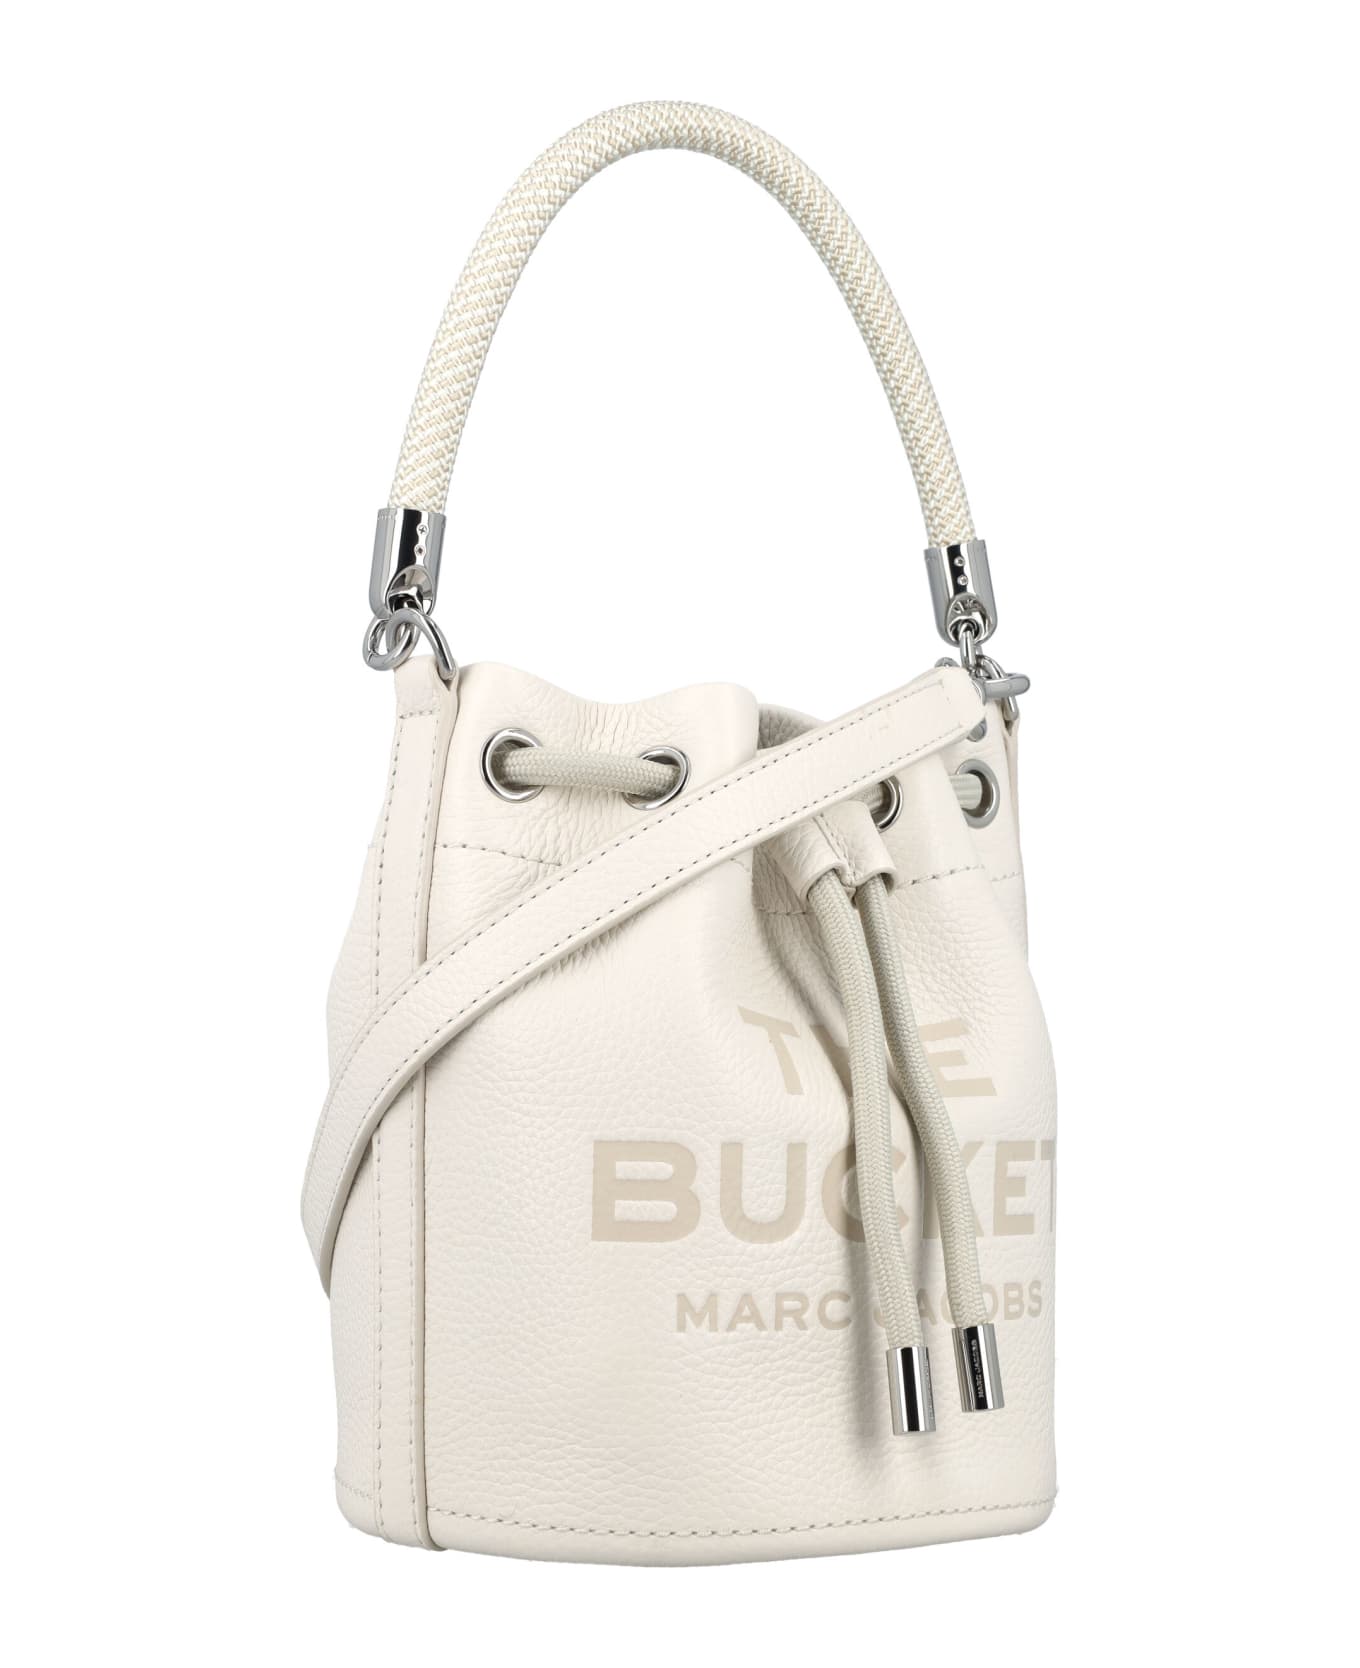 Marc Jacobs The Bucket Bag - COTTON SILVER